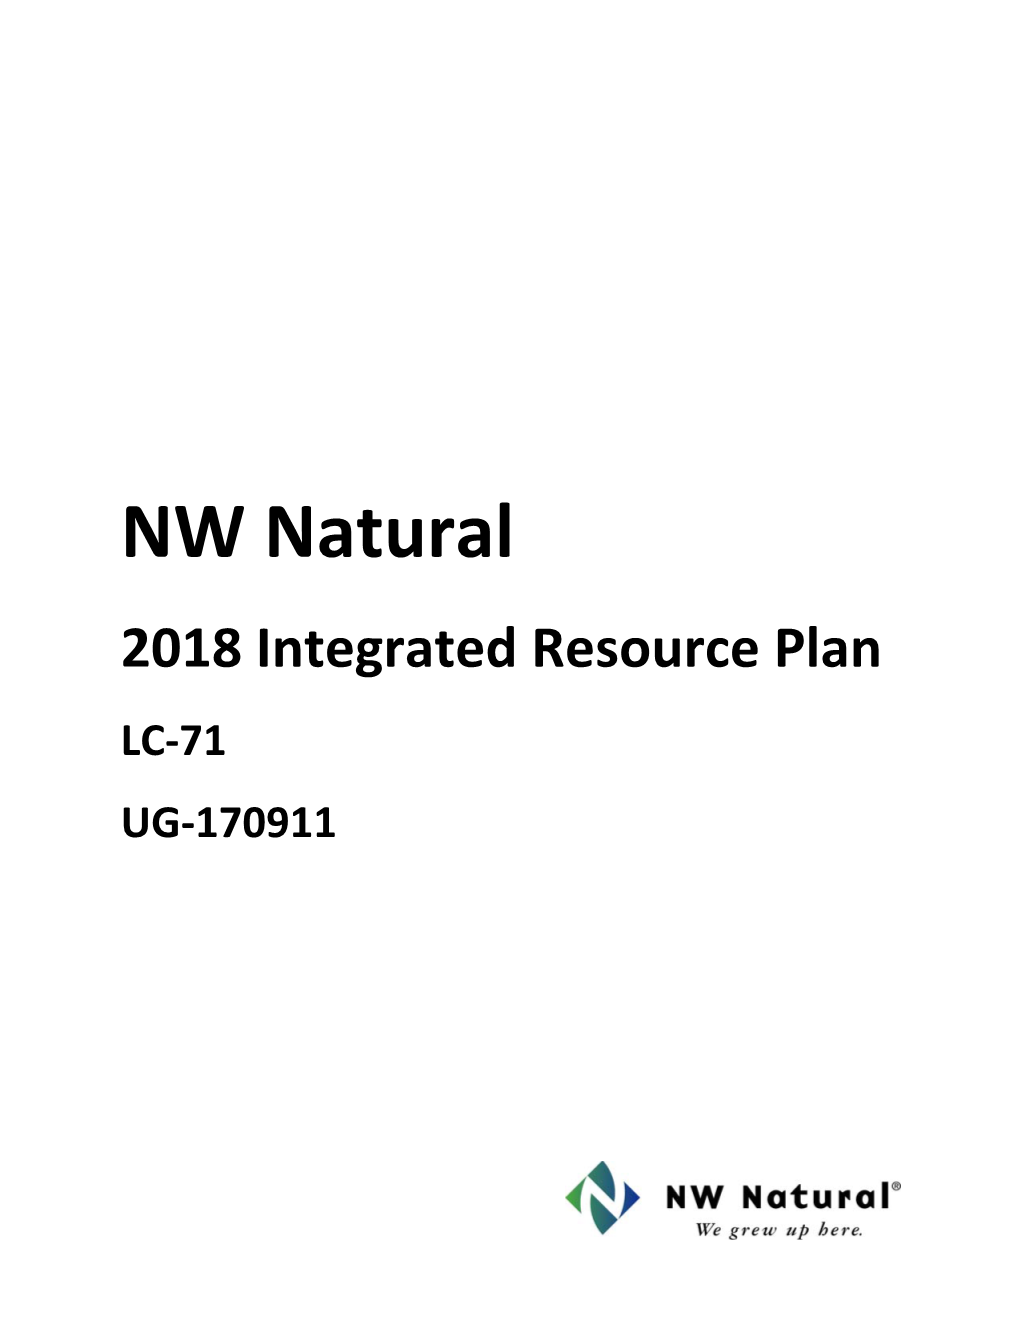 NW-Natural-2018-IRP-1.Pdf